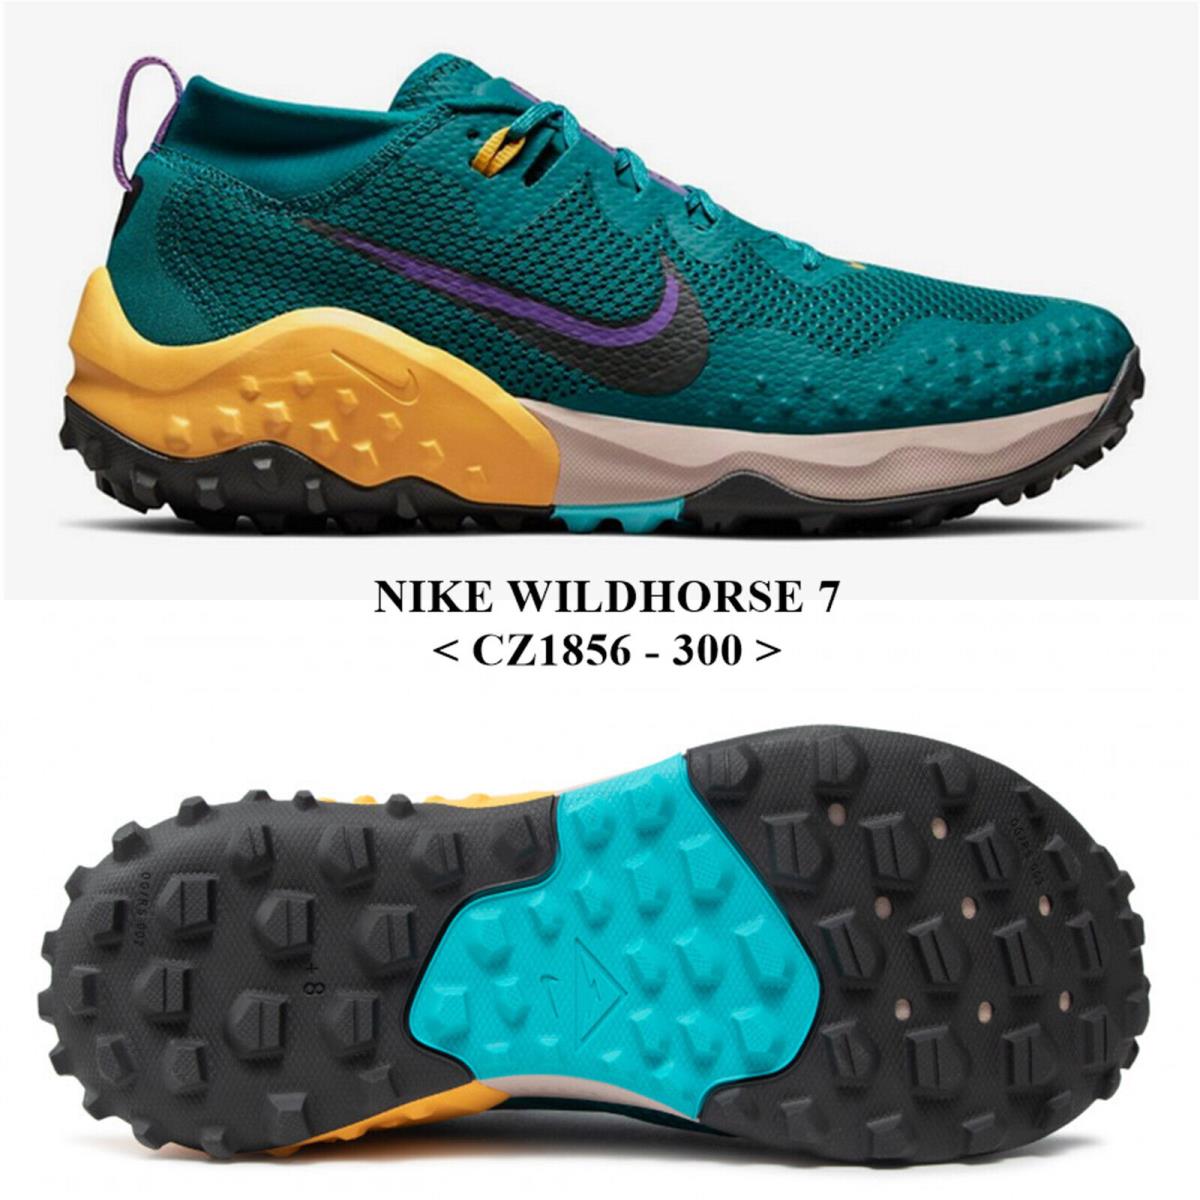 Nike Wildhorse 7 CZ1856 - 300 Men`s Trail Running Shoes with Box NO Lid